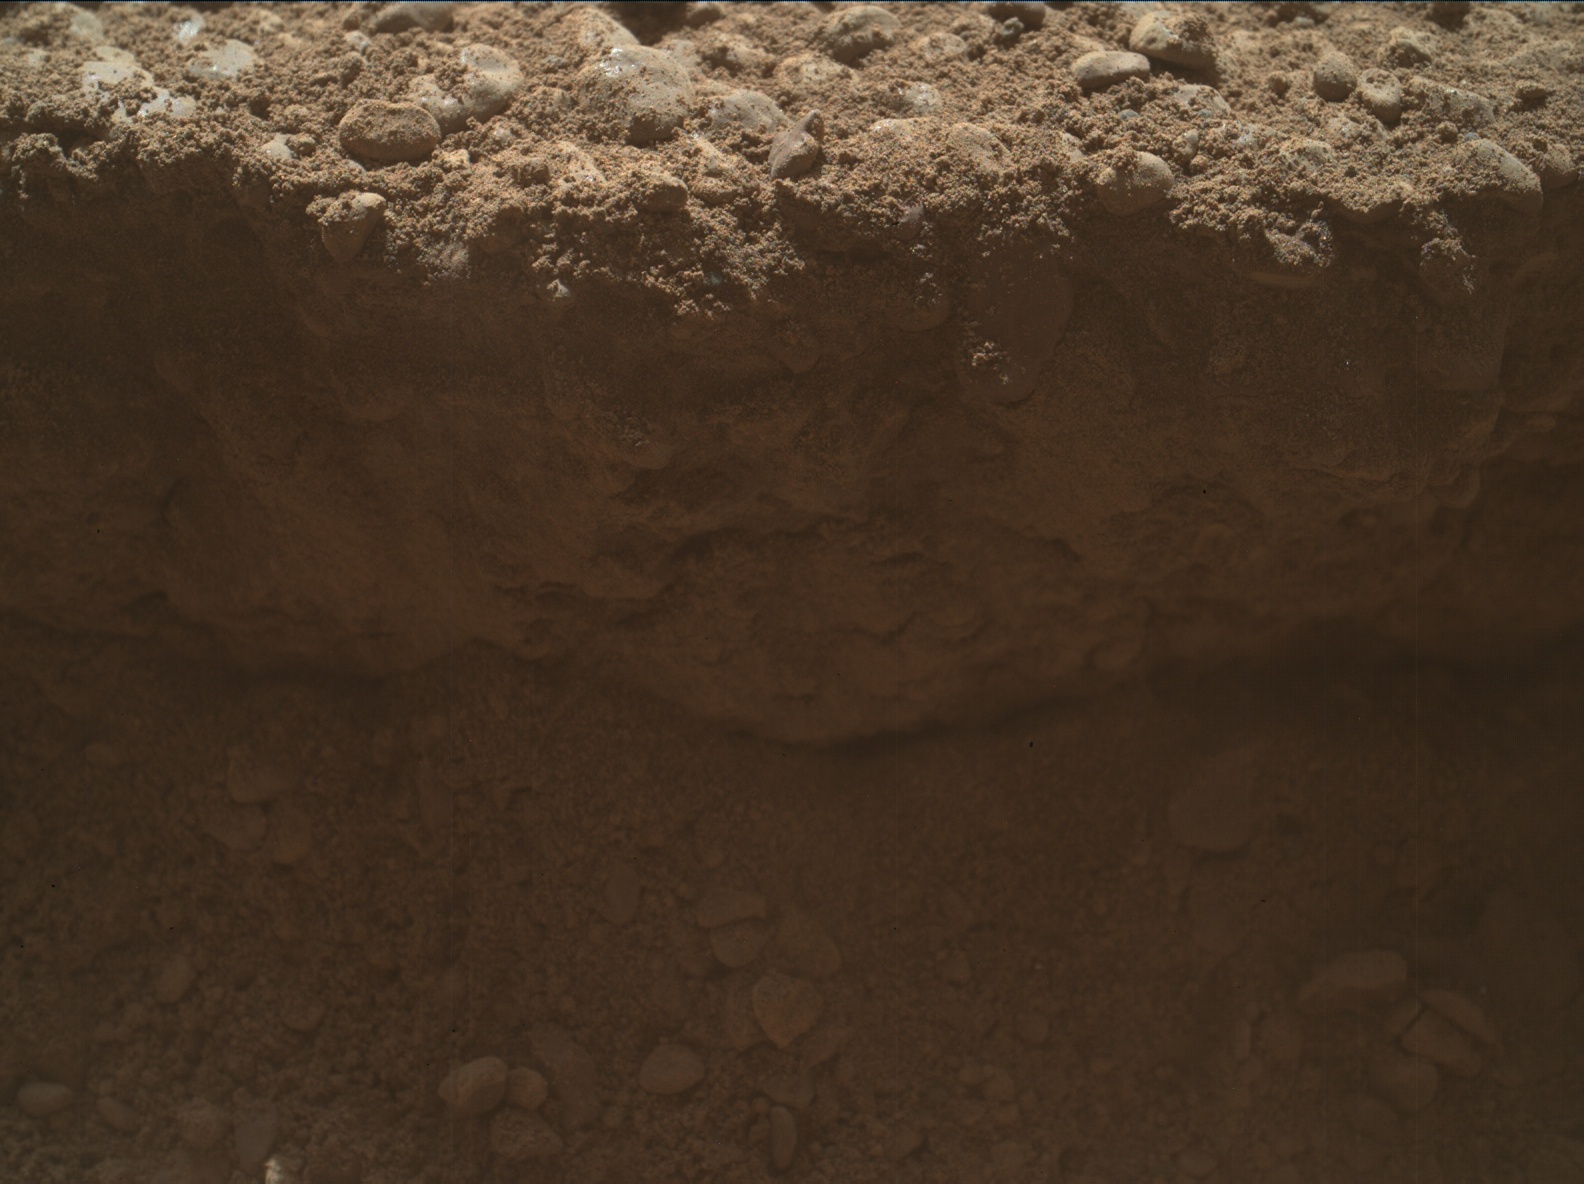 Nasa's Mars rover Curiosity acquired this image using its Mars Hand Lens Imager (MAHLI) on Sol 2557